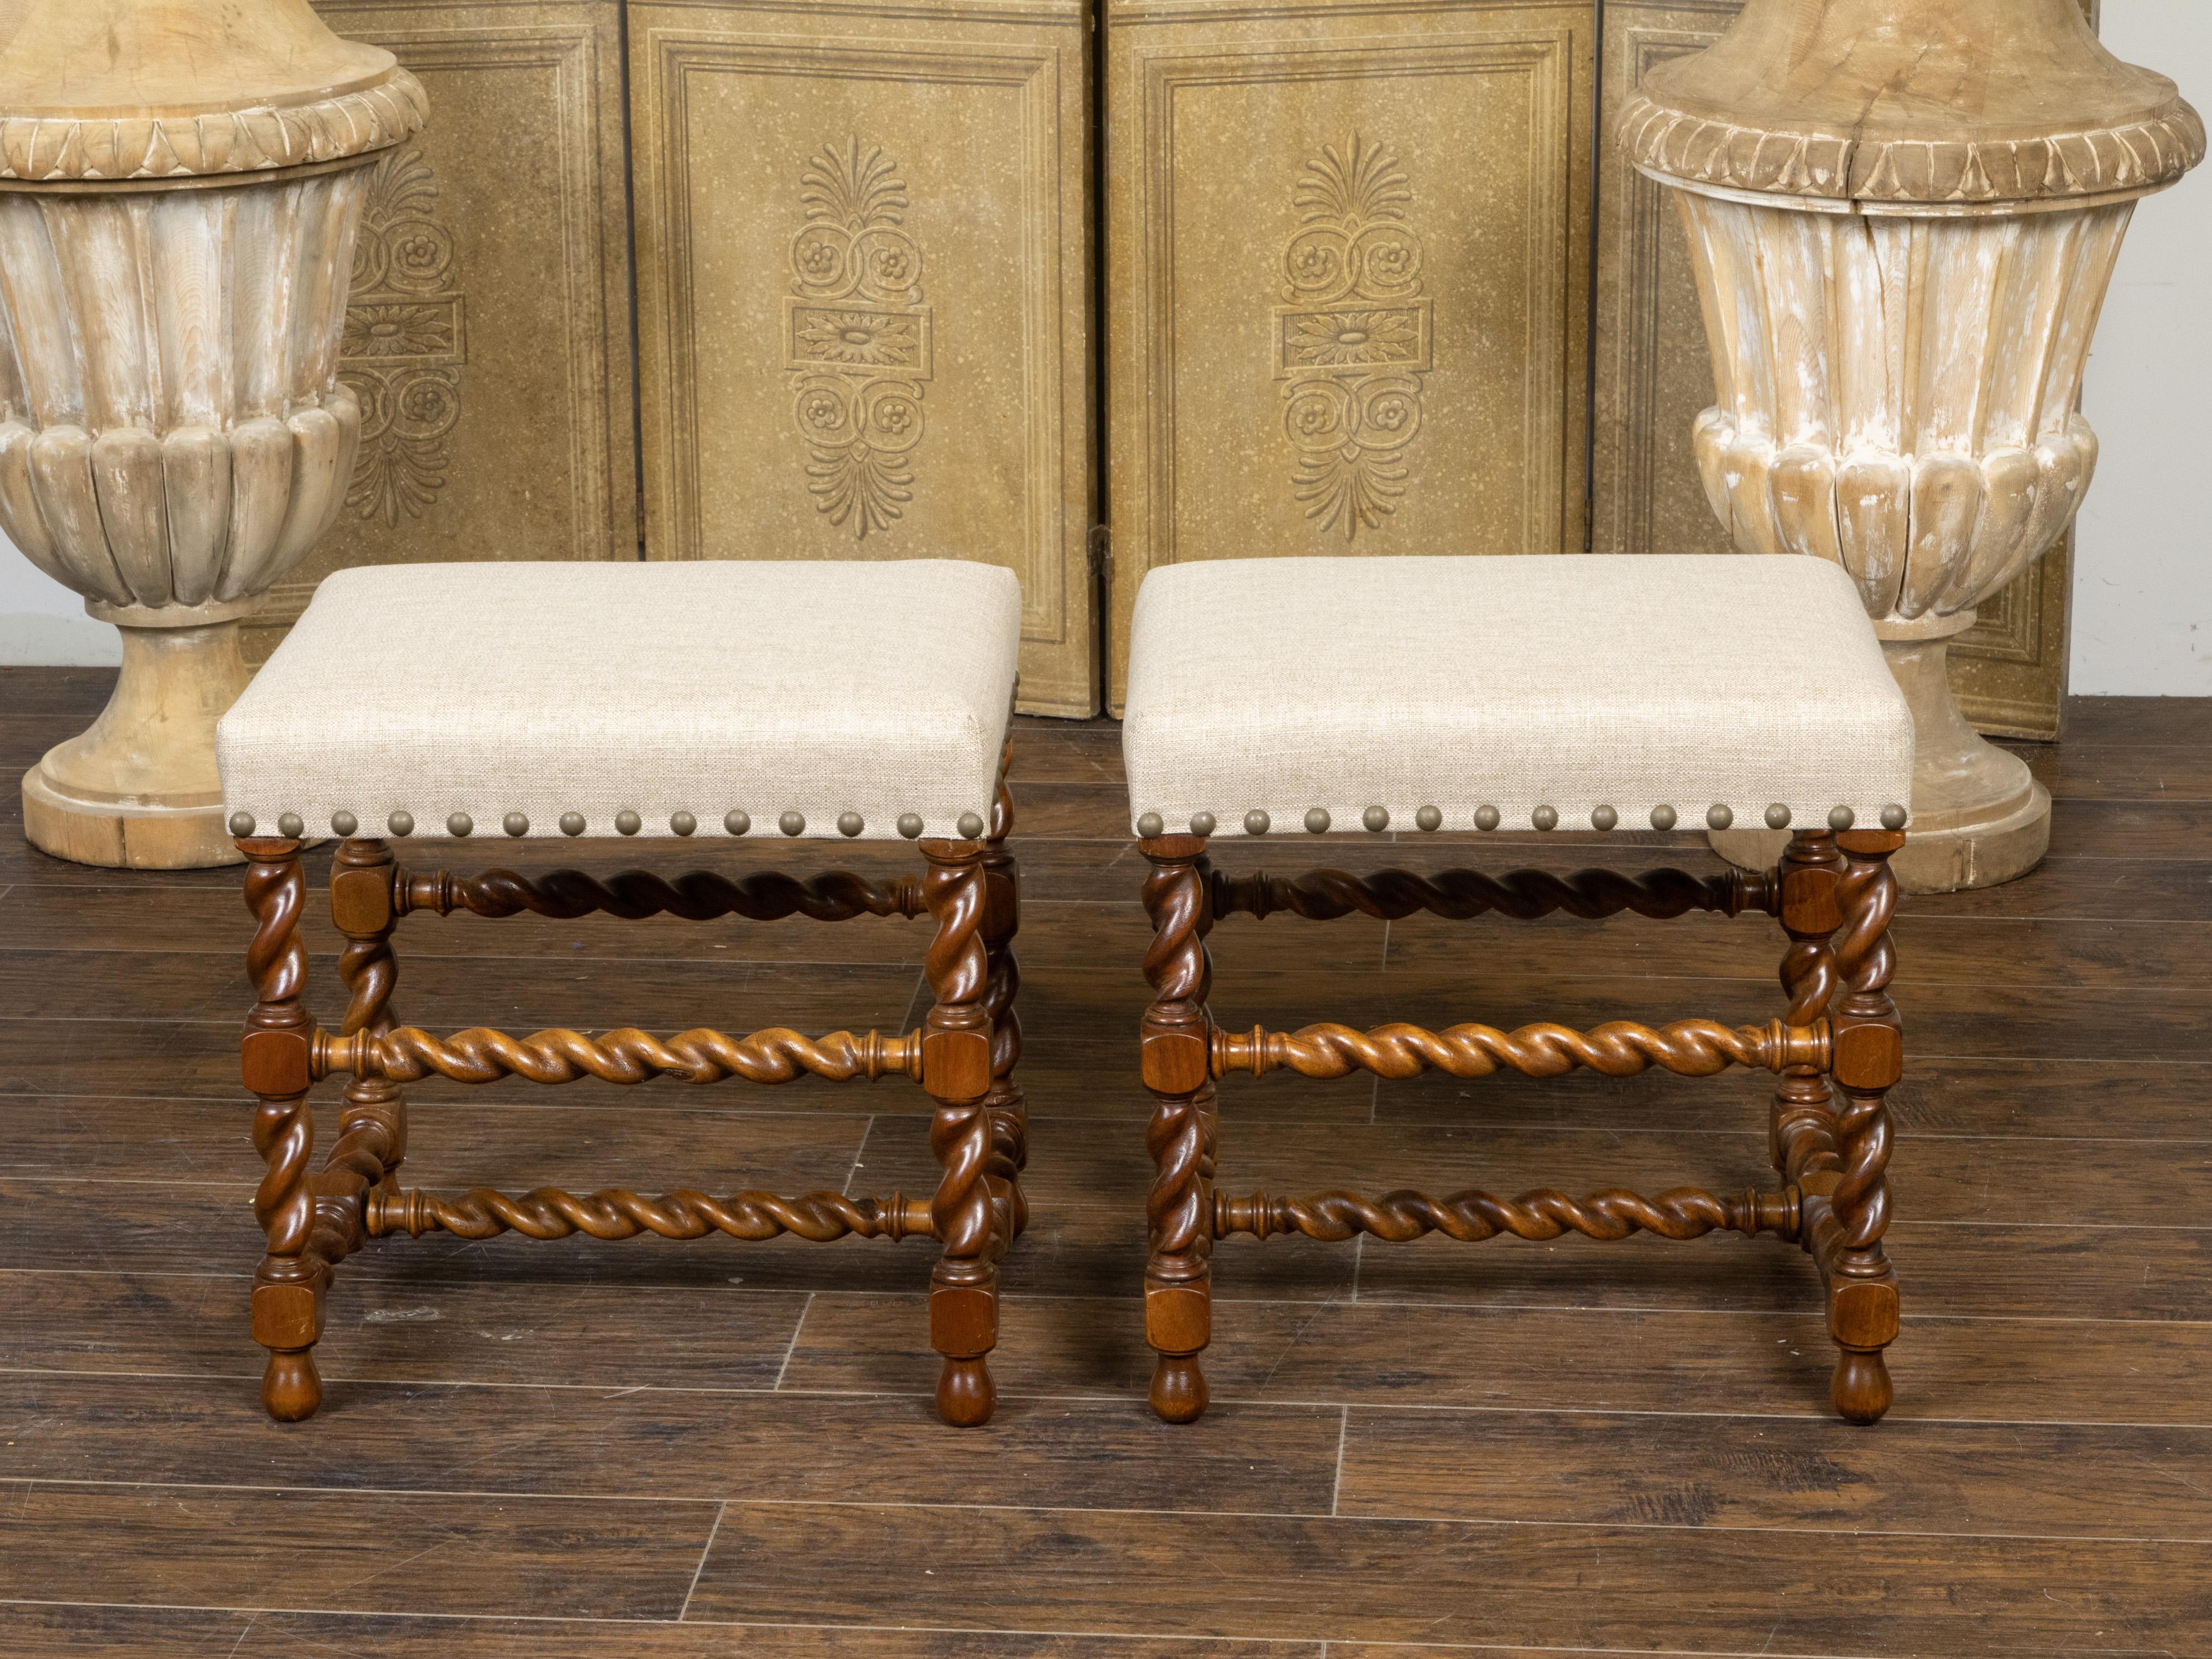 20th Century Pair of English 1920s Barley Twist Oak Stools with Linen Upholstery and Nailhead